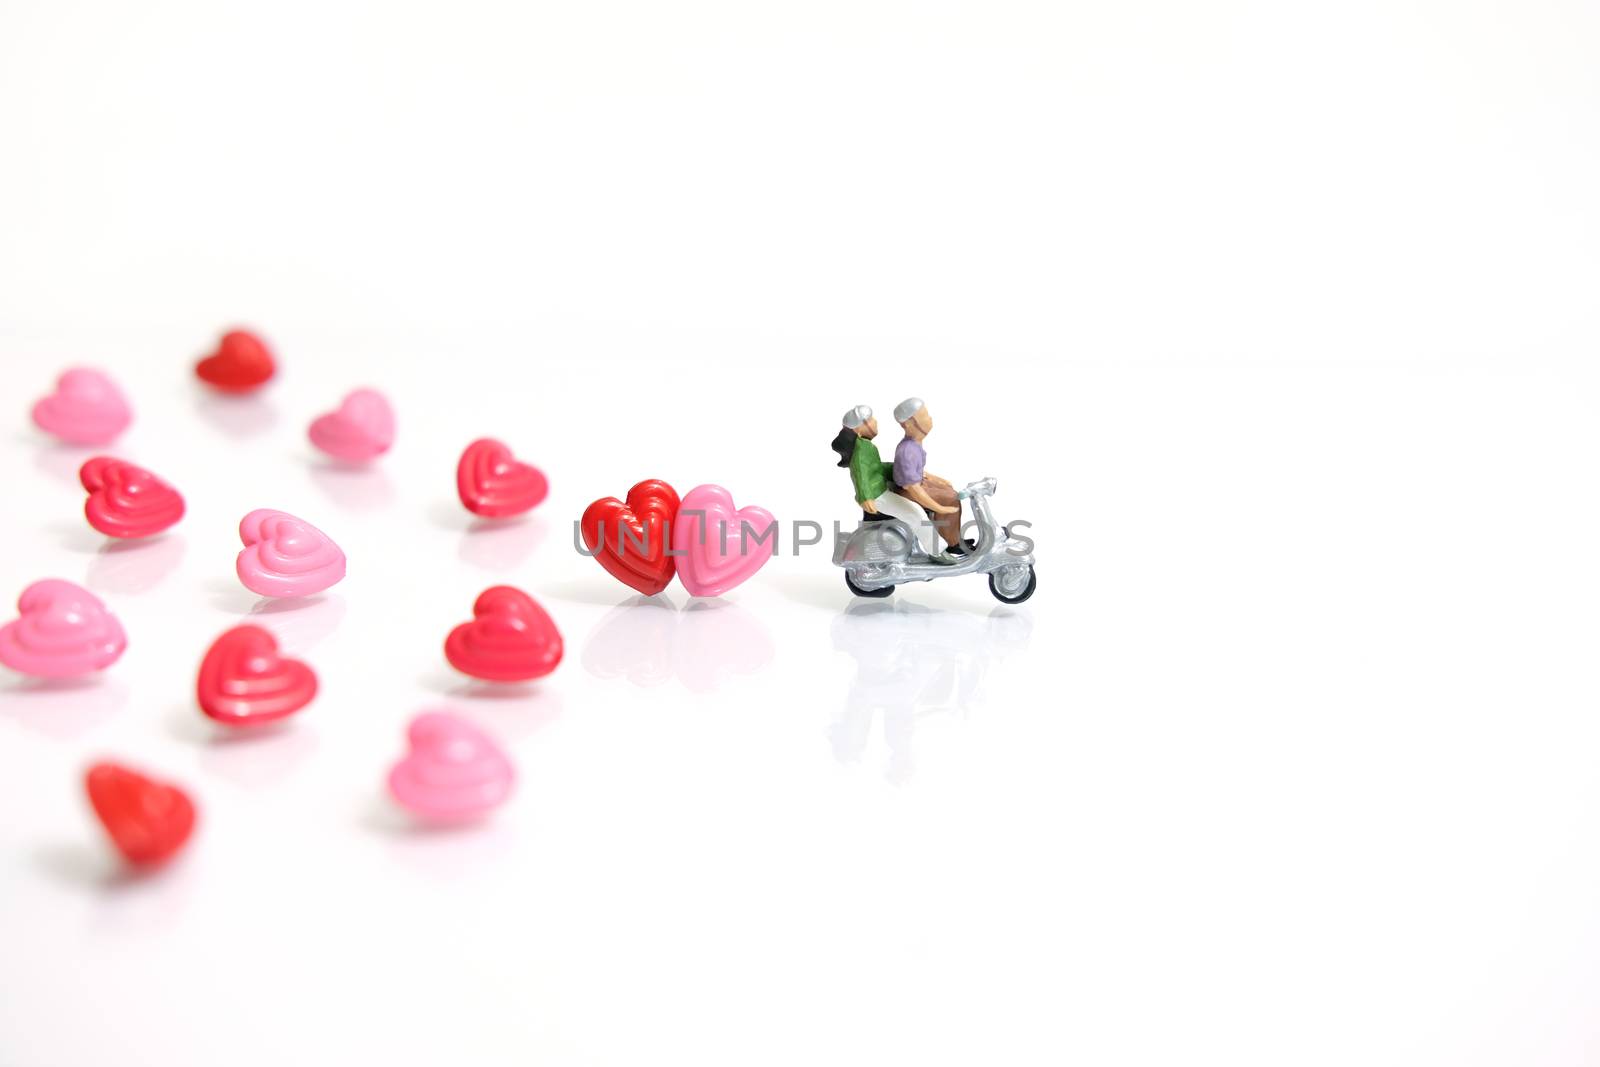 Miniature people photography for valentines day, young couple riding scooter with I love you beads on shiny white background